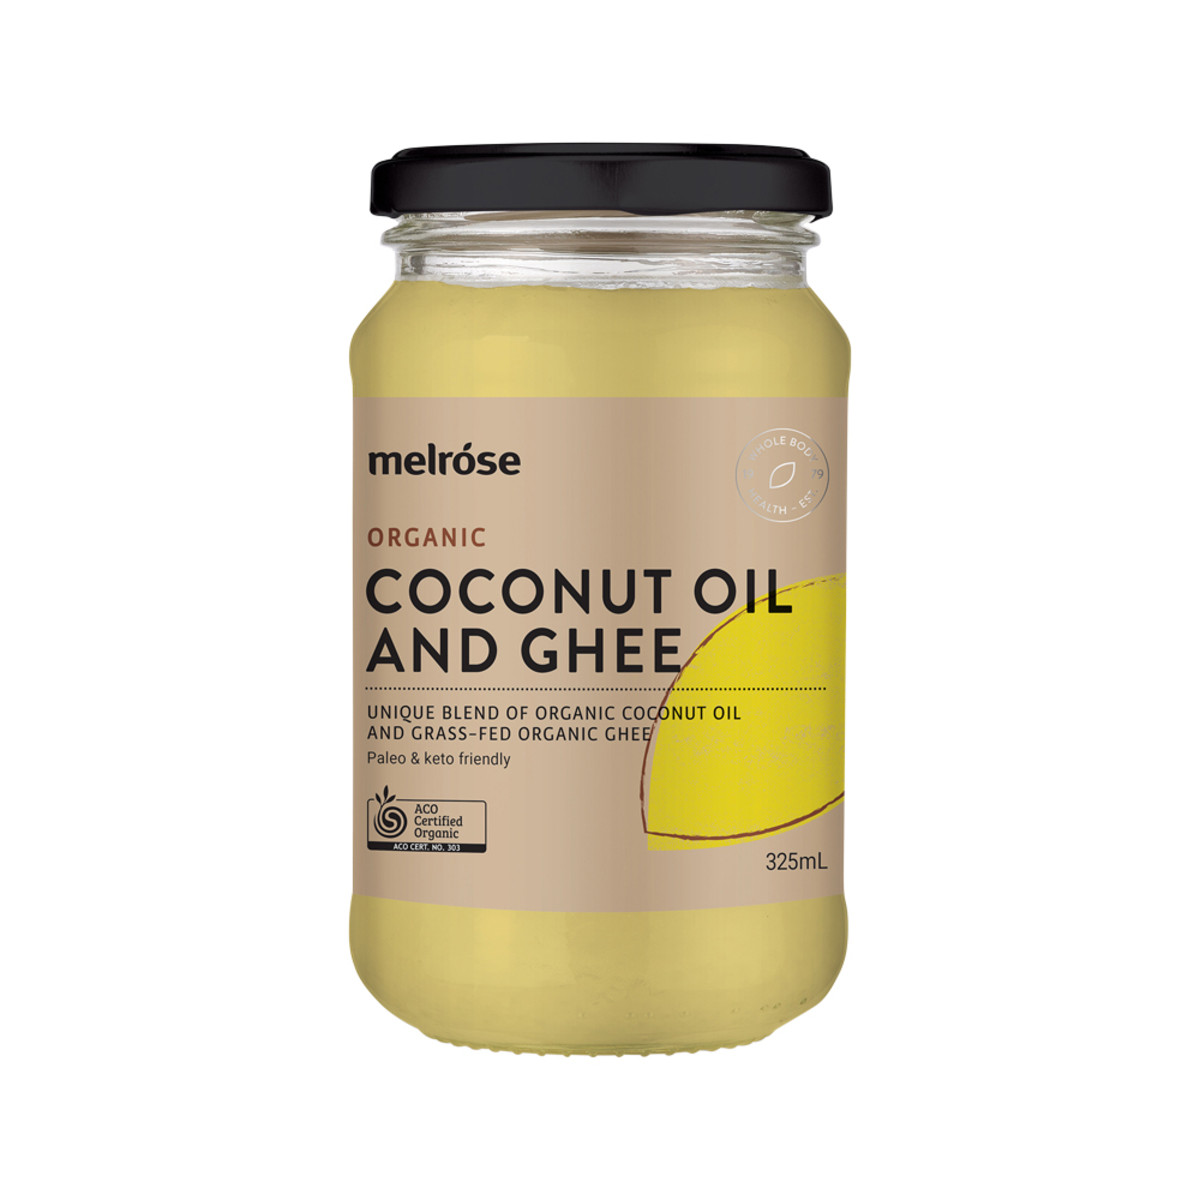 MELROSE - Organic Coconut Oil and Ghee